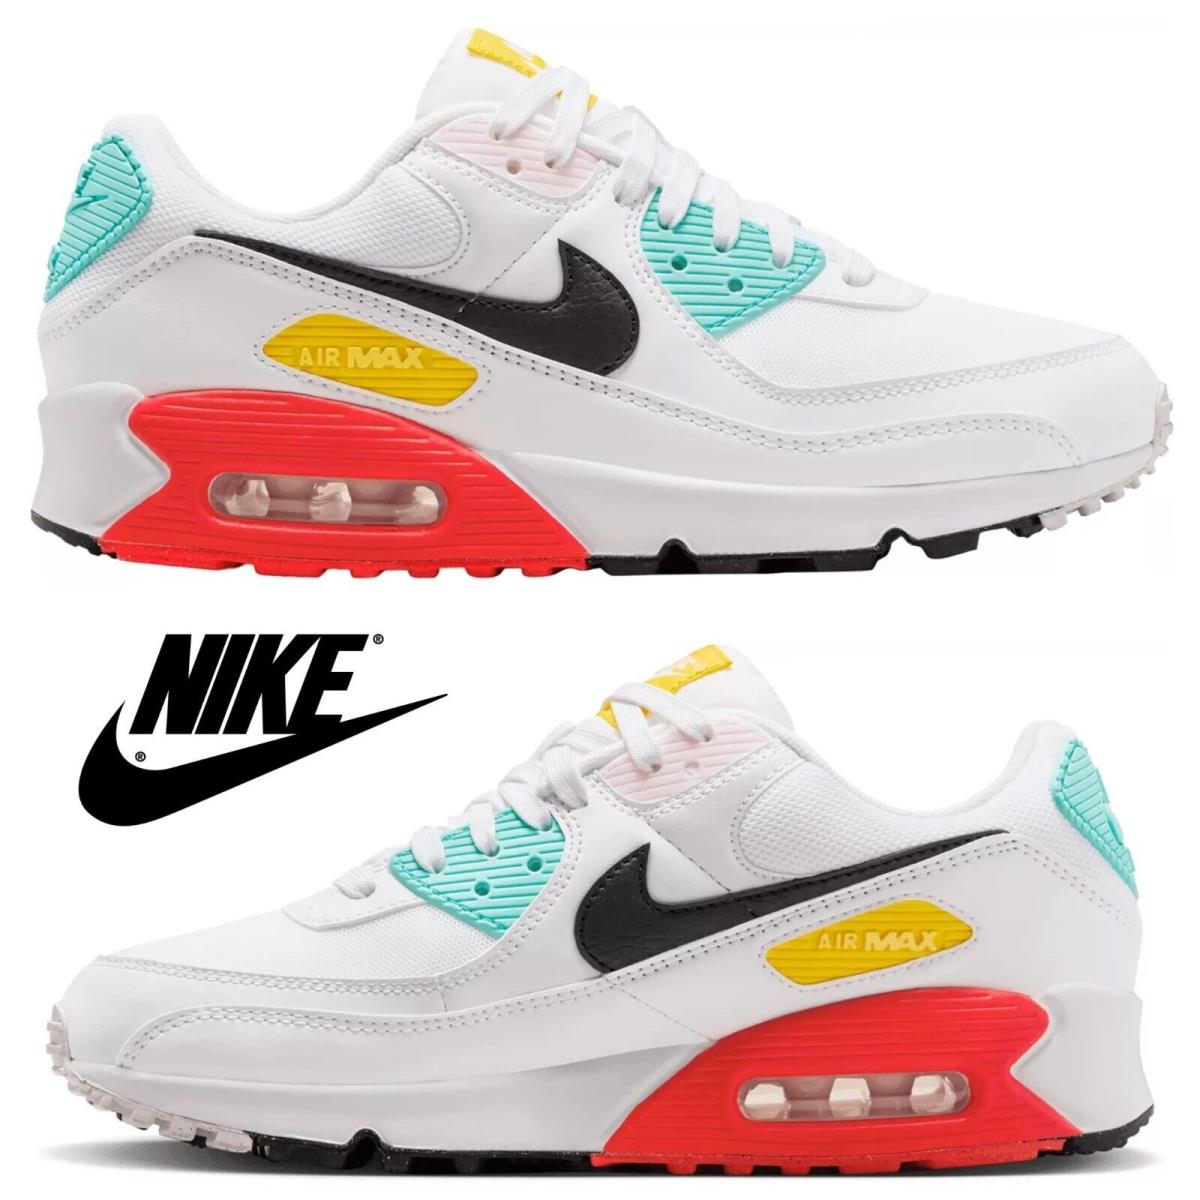 Nike Air Max 90 Women`s Sneakers Sport Running Gym Comfort Athletic Shoes